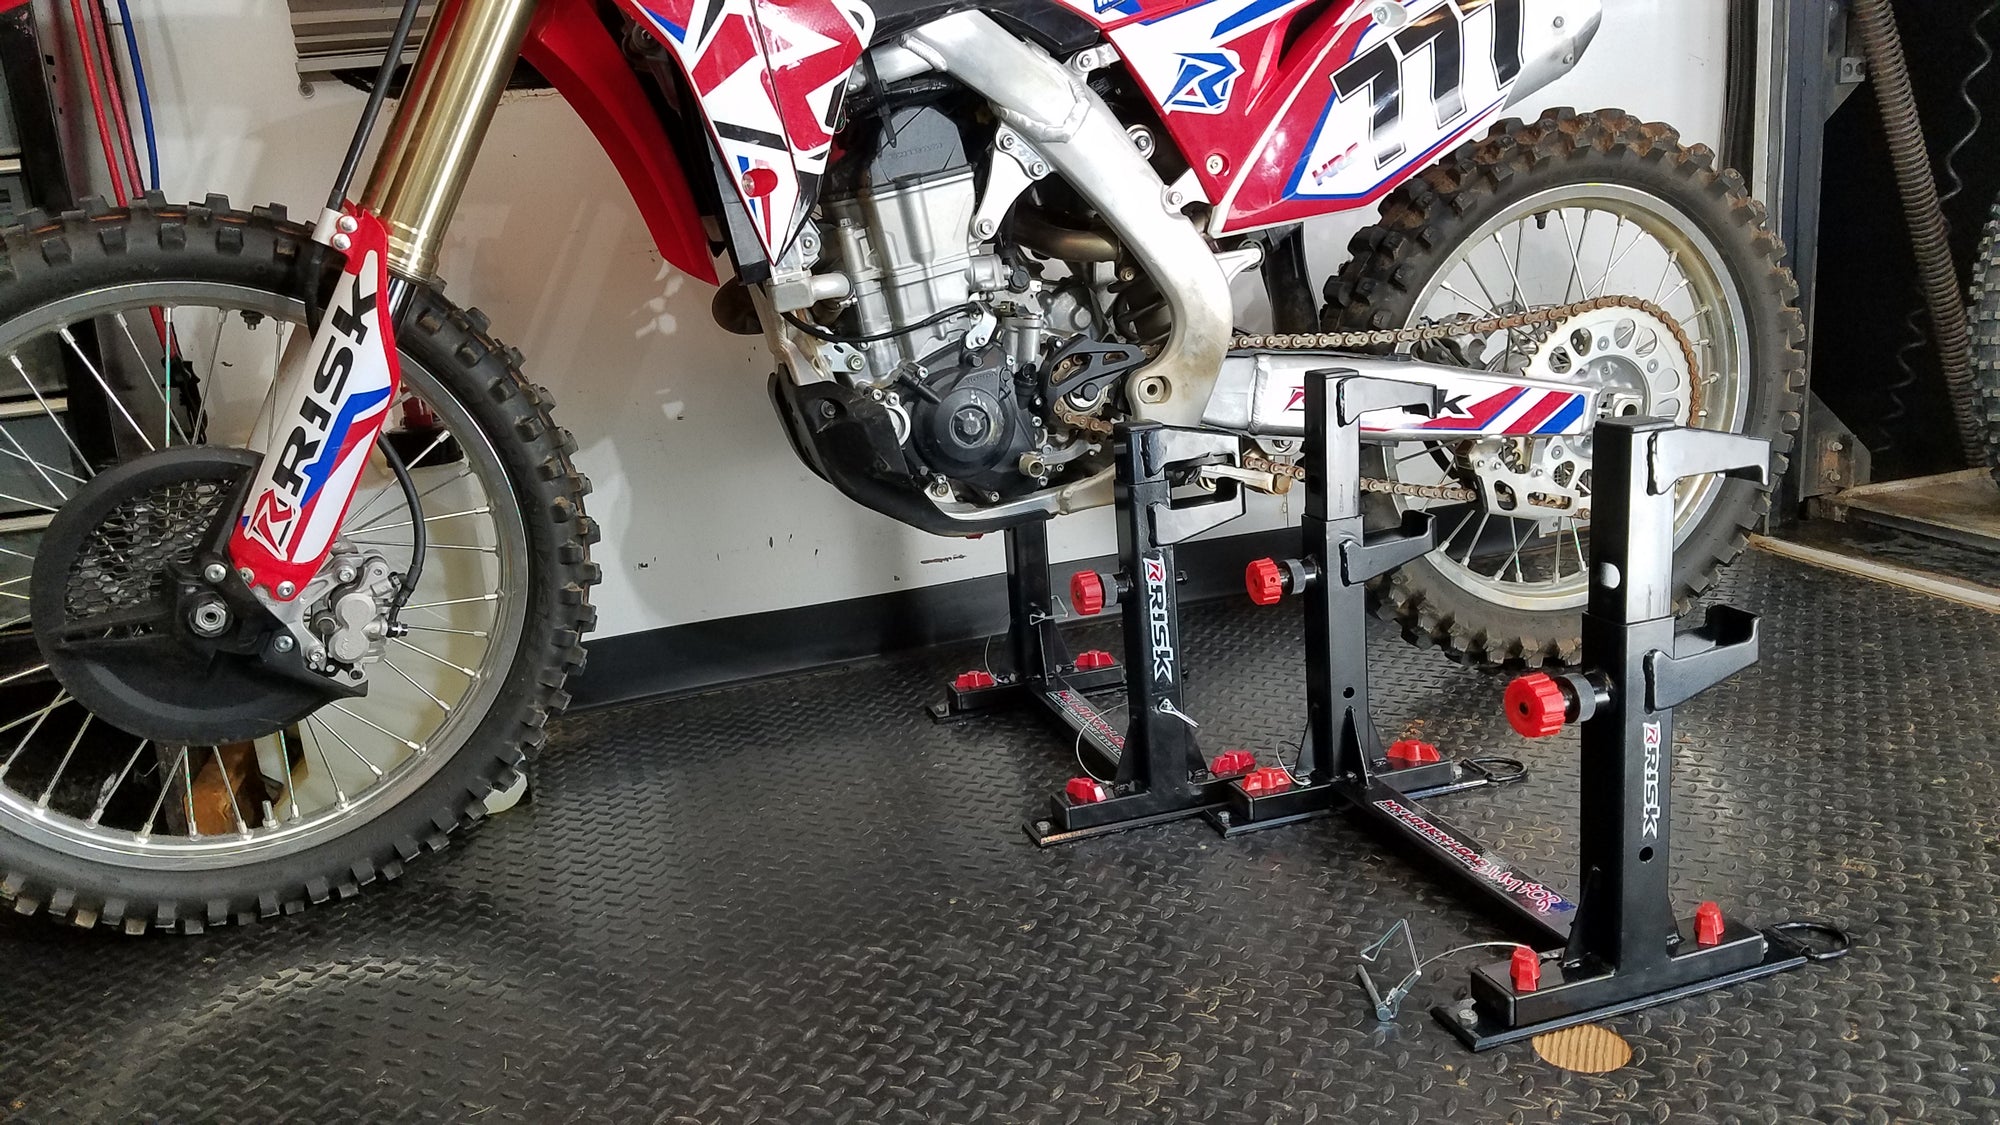 trailer with 2 lock-n-load moto transport systems. One empty and one with a dirt bike installed